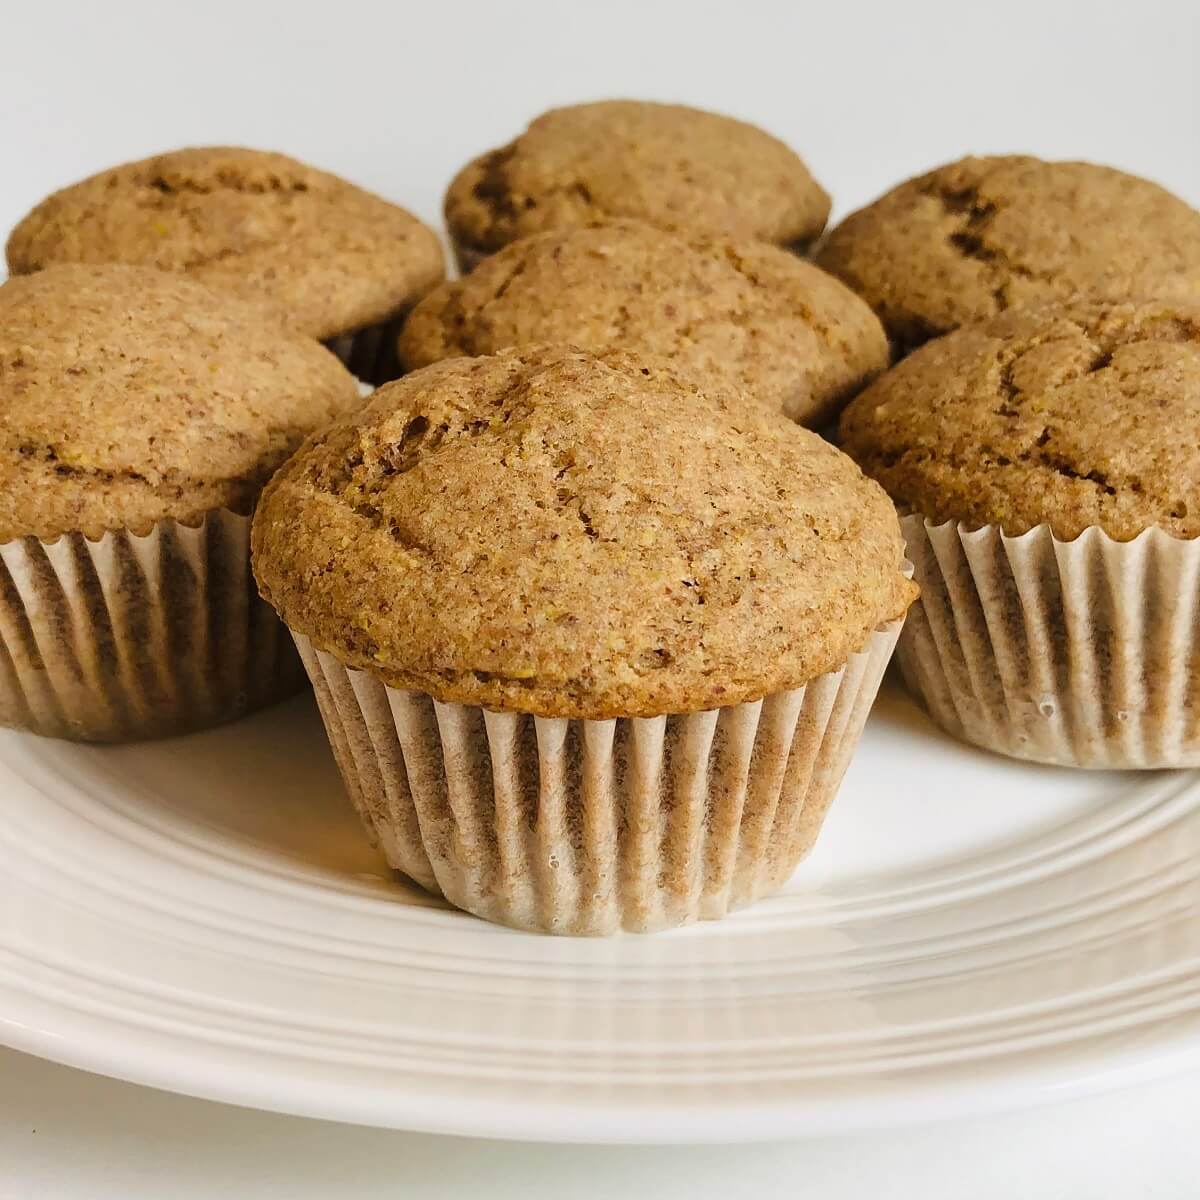 Flaxseed muffins on a white plate.